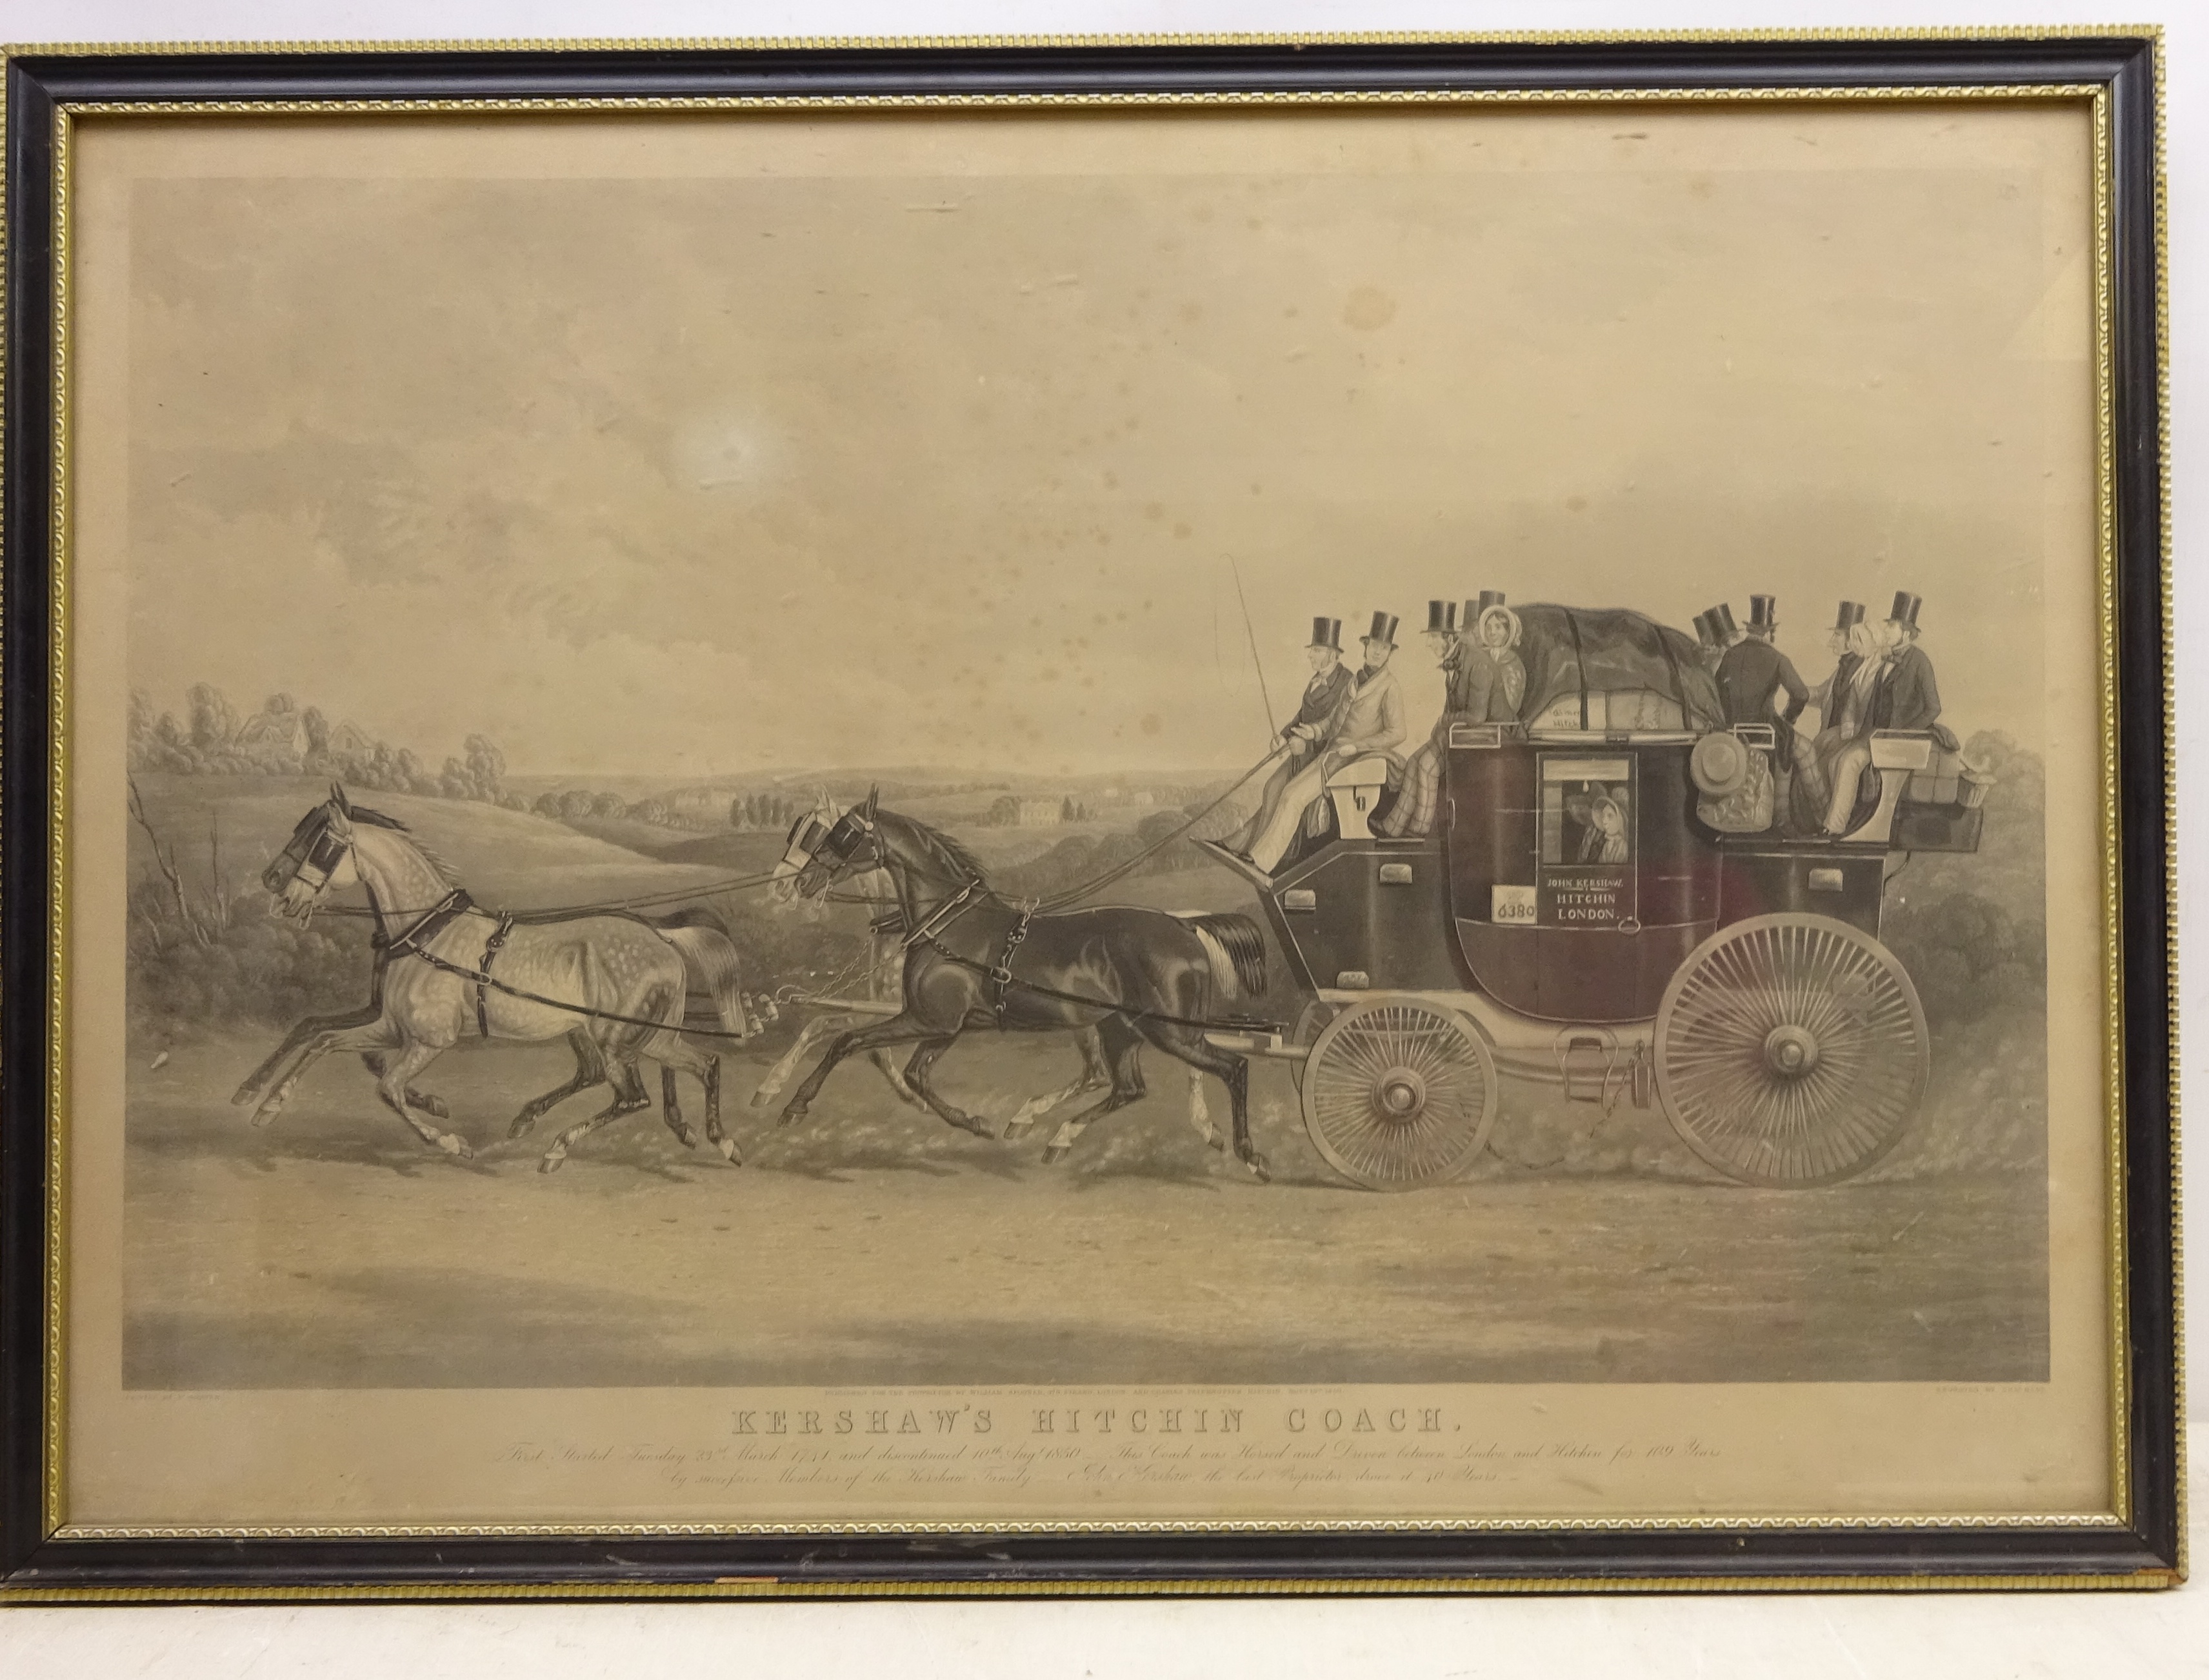 'Kershaw's Hitchin Coach', engraving by C Hunt after William Shayer, pub. - Image 2 of 2